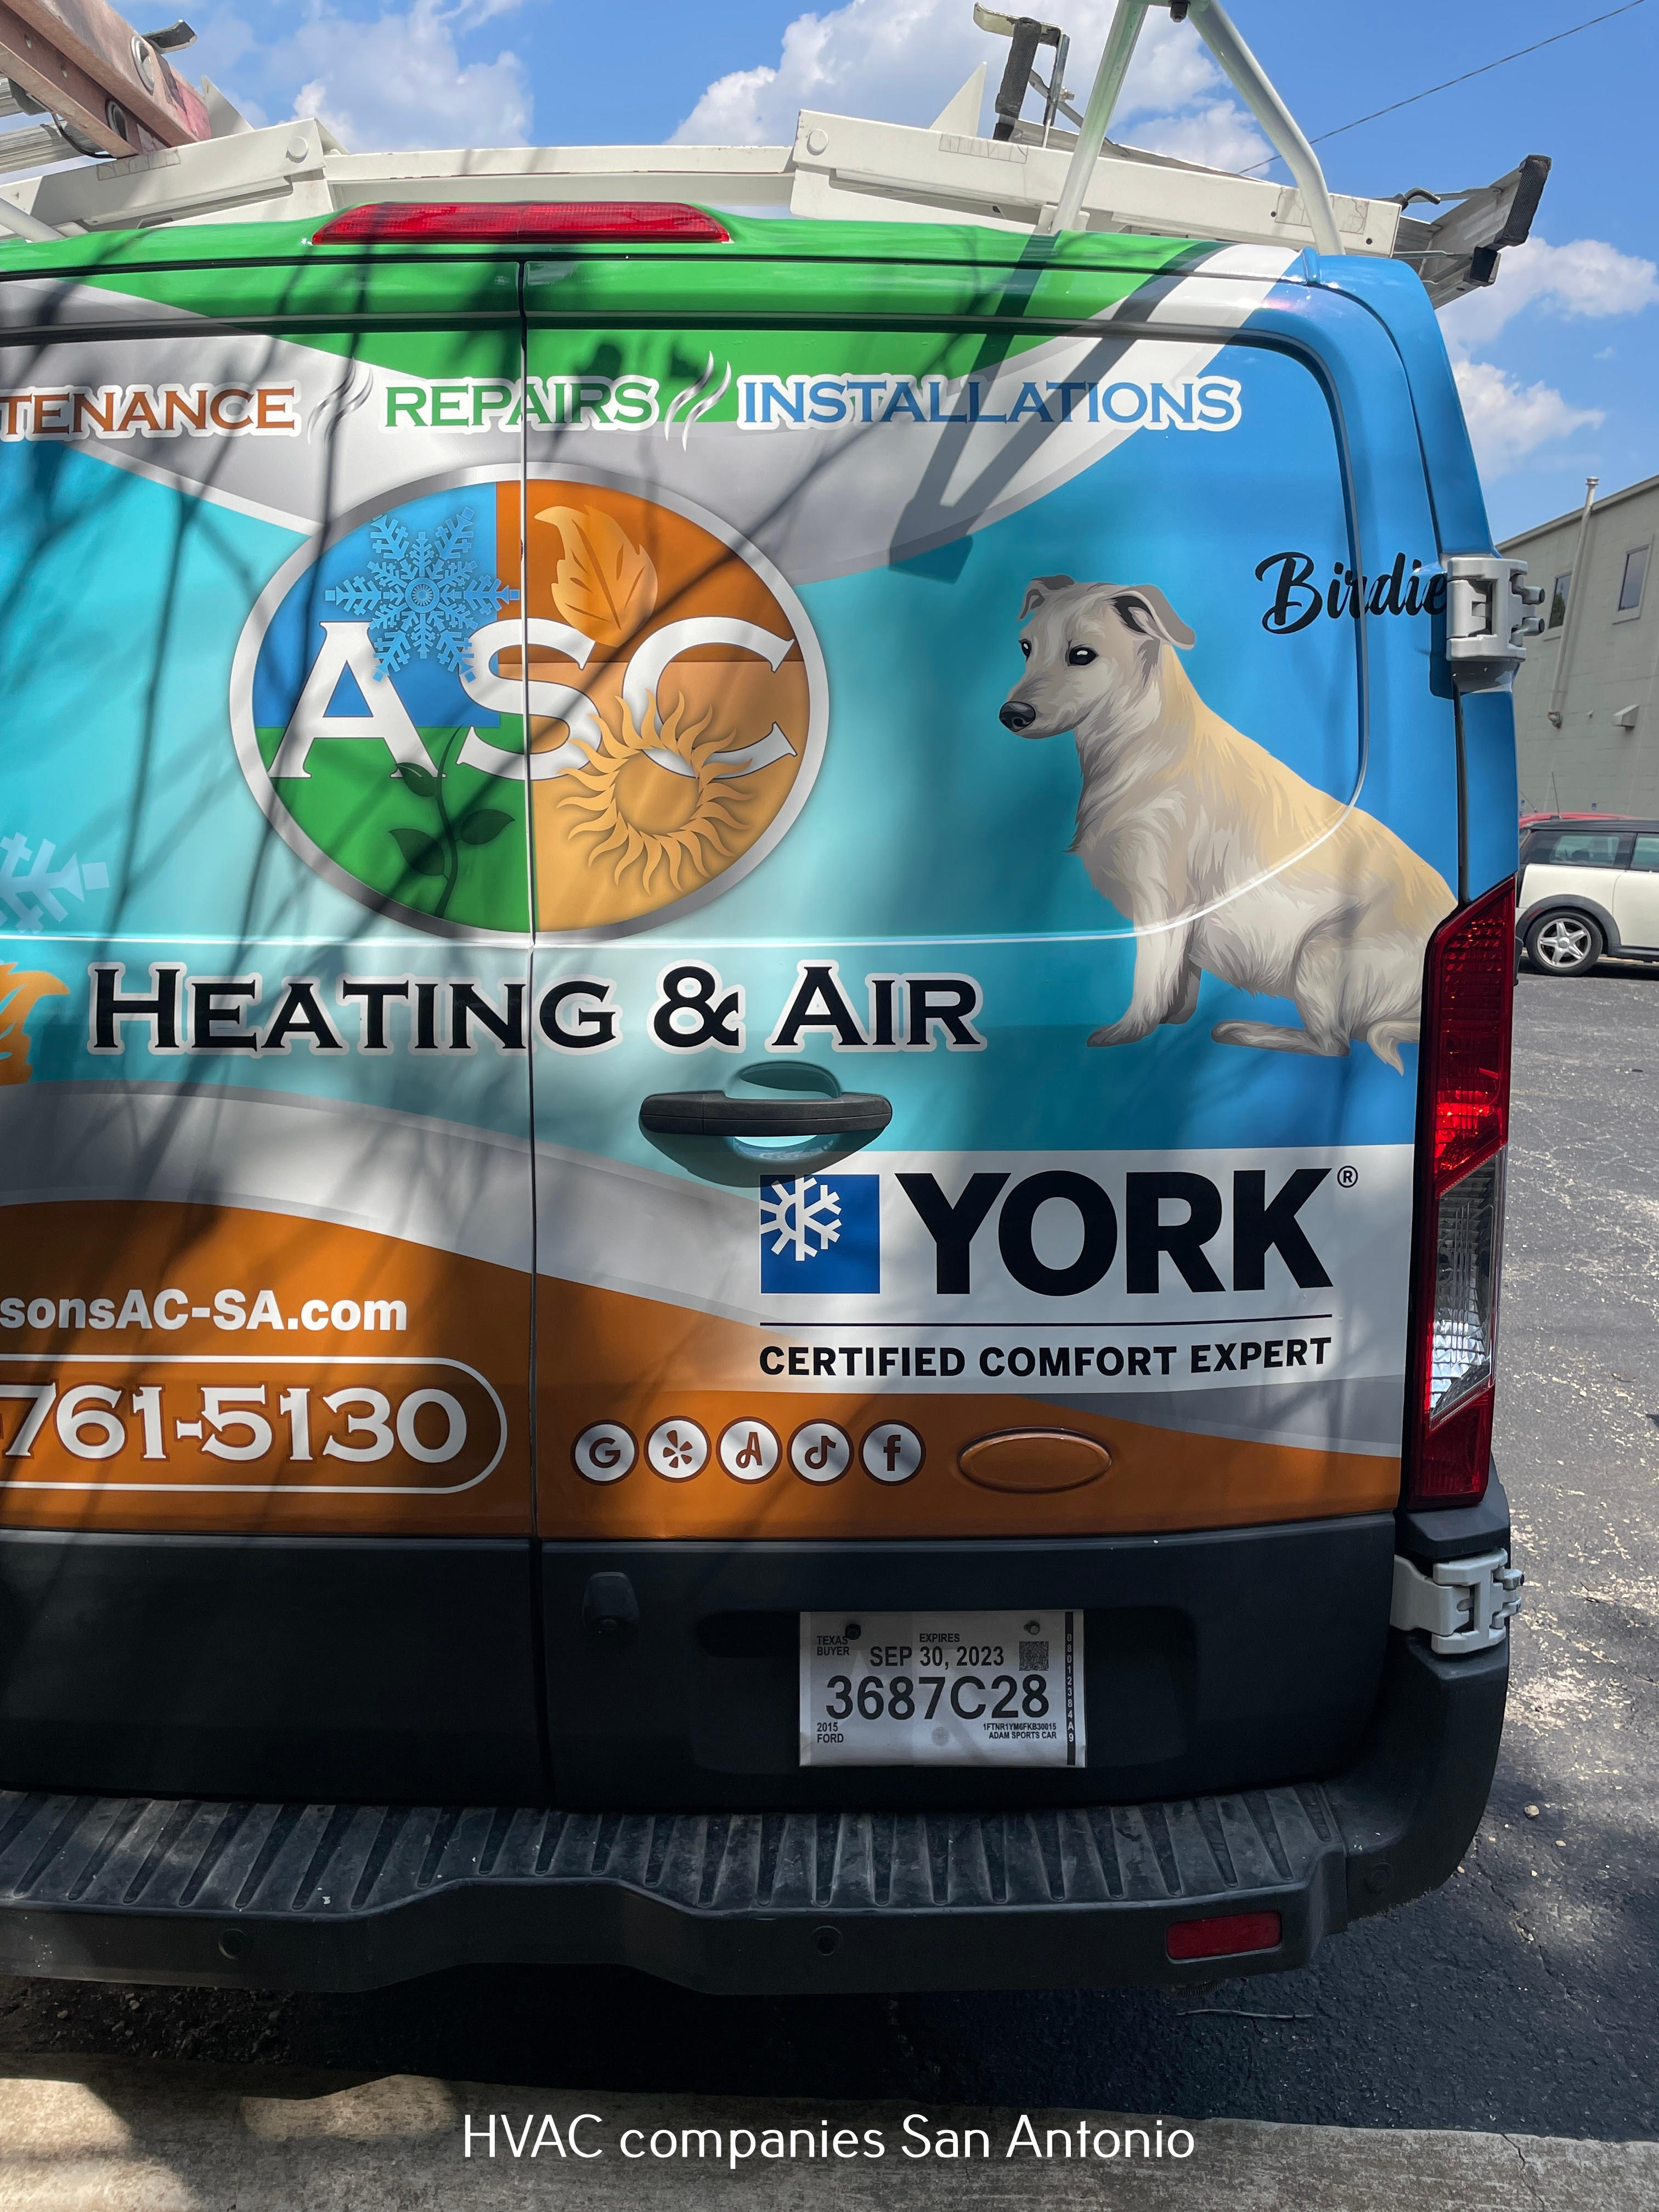 ASC Heating & Air Offers Premium Services To Homes and Commercial Businesses.